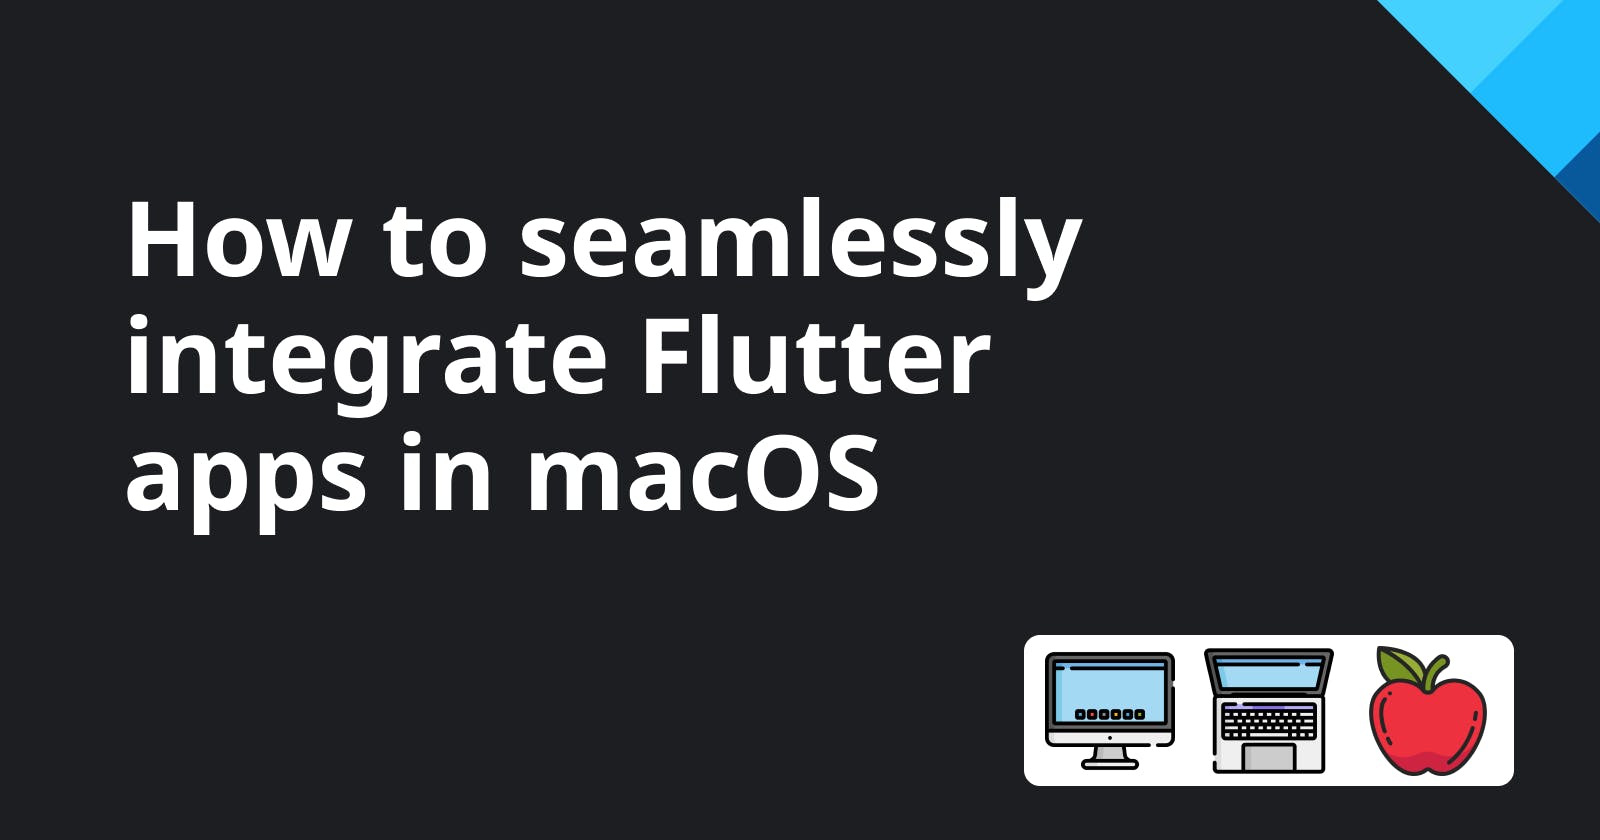 How to seamlessly integrate Flutter apps in macOS